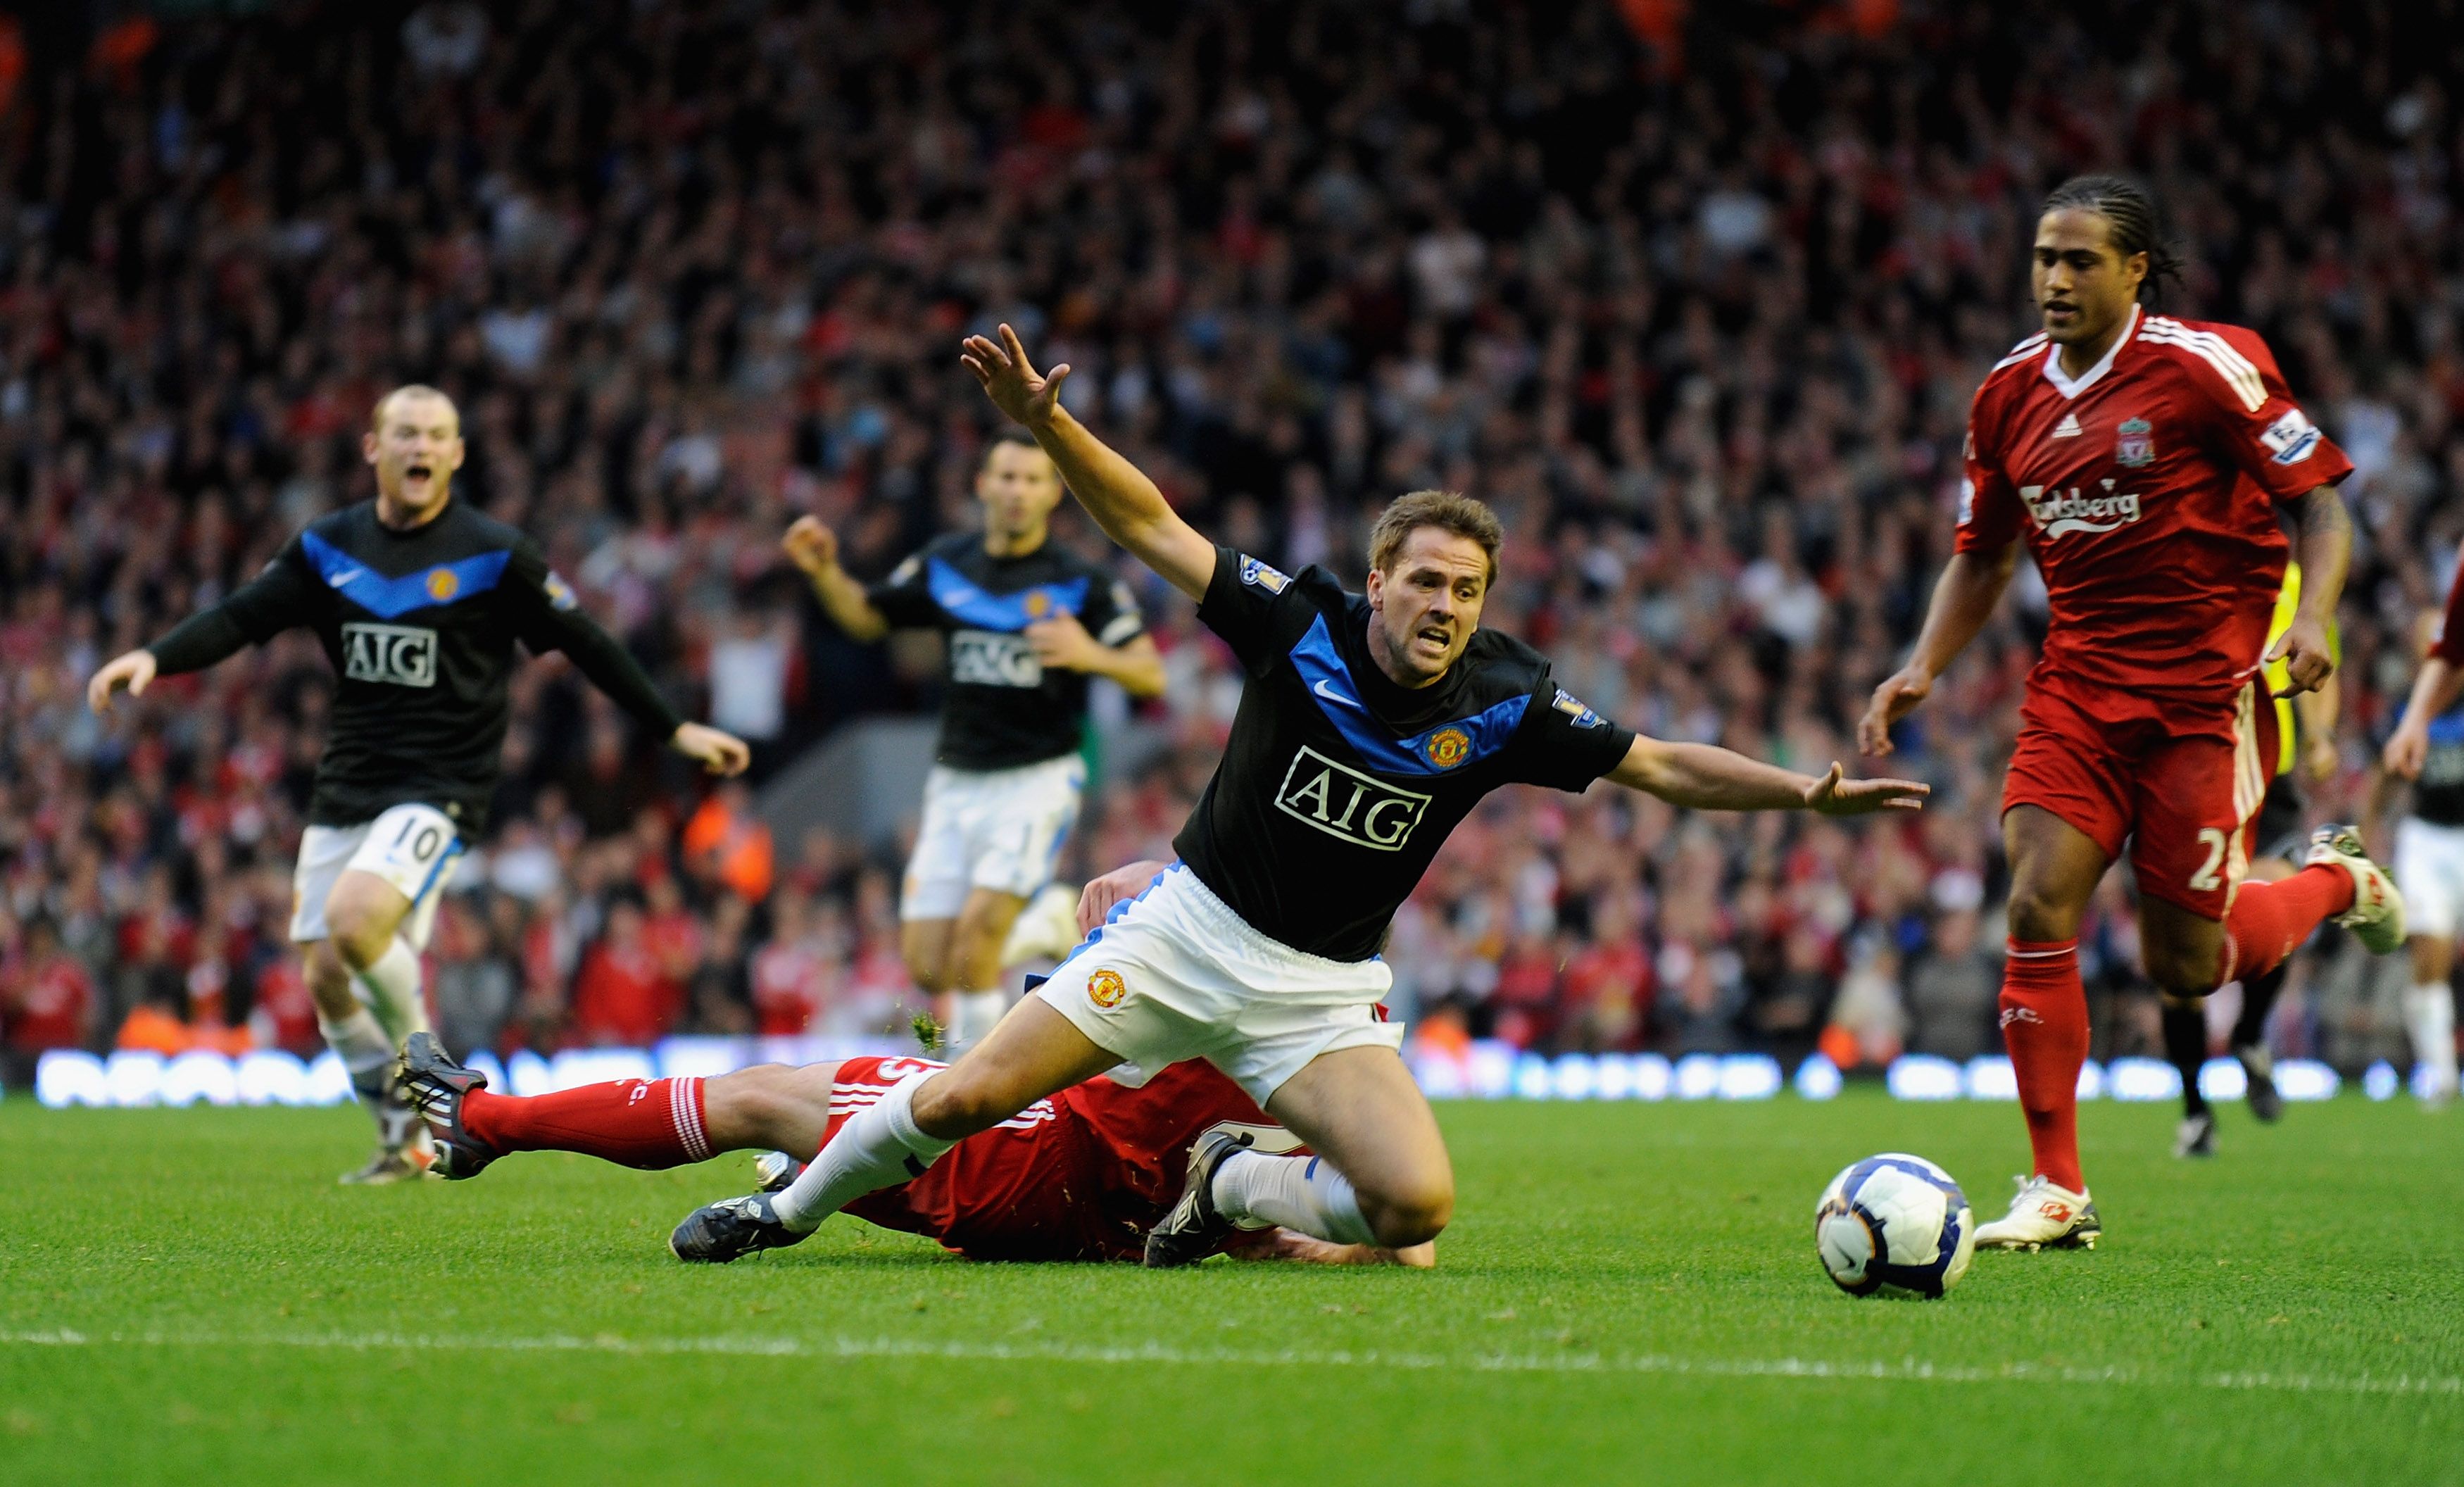 LIVERPOOL, ENGLAND - OCTOBER 25: Michael Owen of Manchester United is brought down by Jamie Carragher of Liverpool during the Barclays Premier League match between Liverpool and Manchester United at Anfield on October 25, 2009 in Liverpool, England. (Photo by Michael Regan/Getty Images)